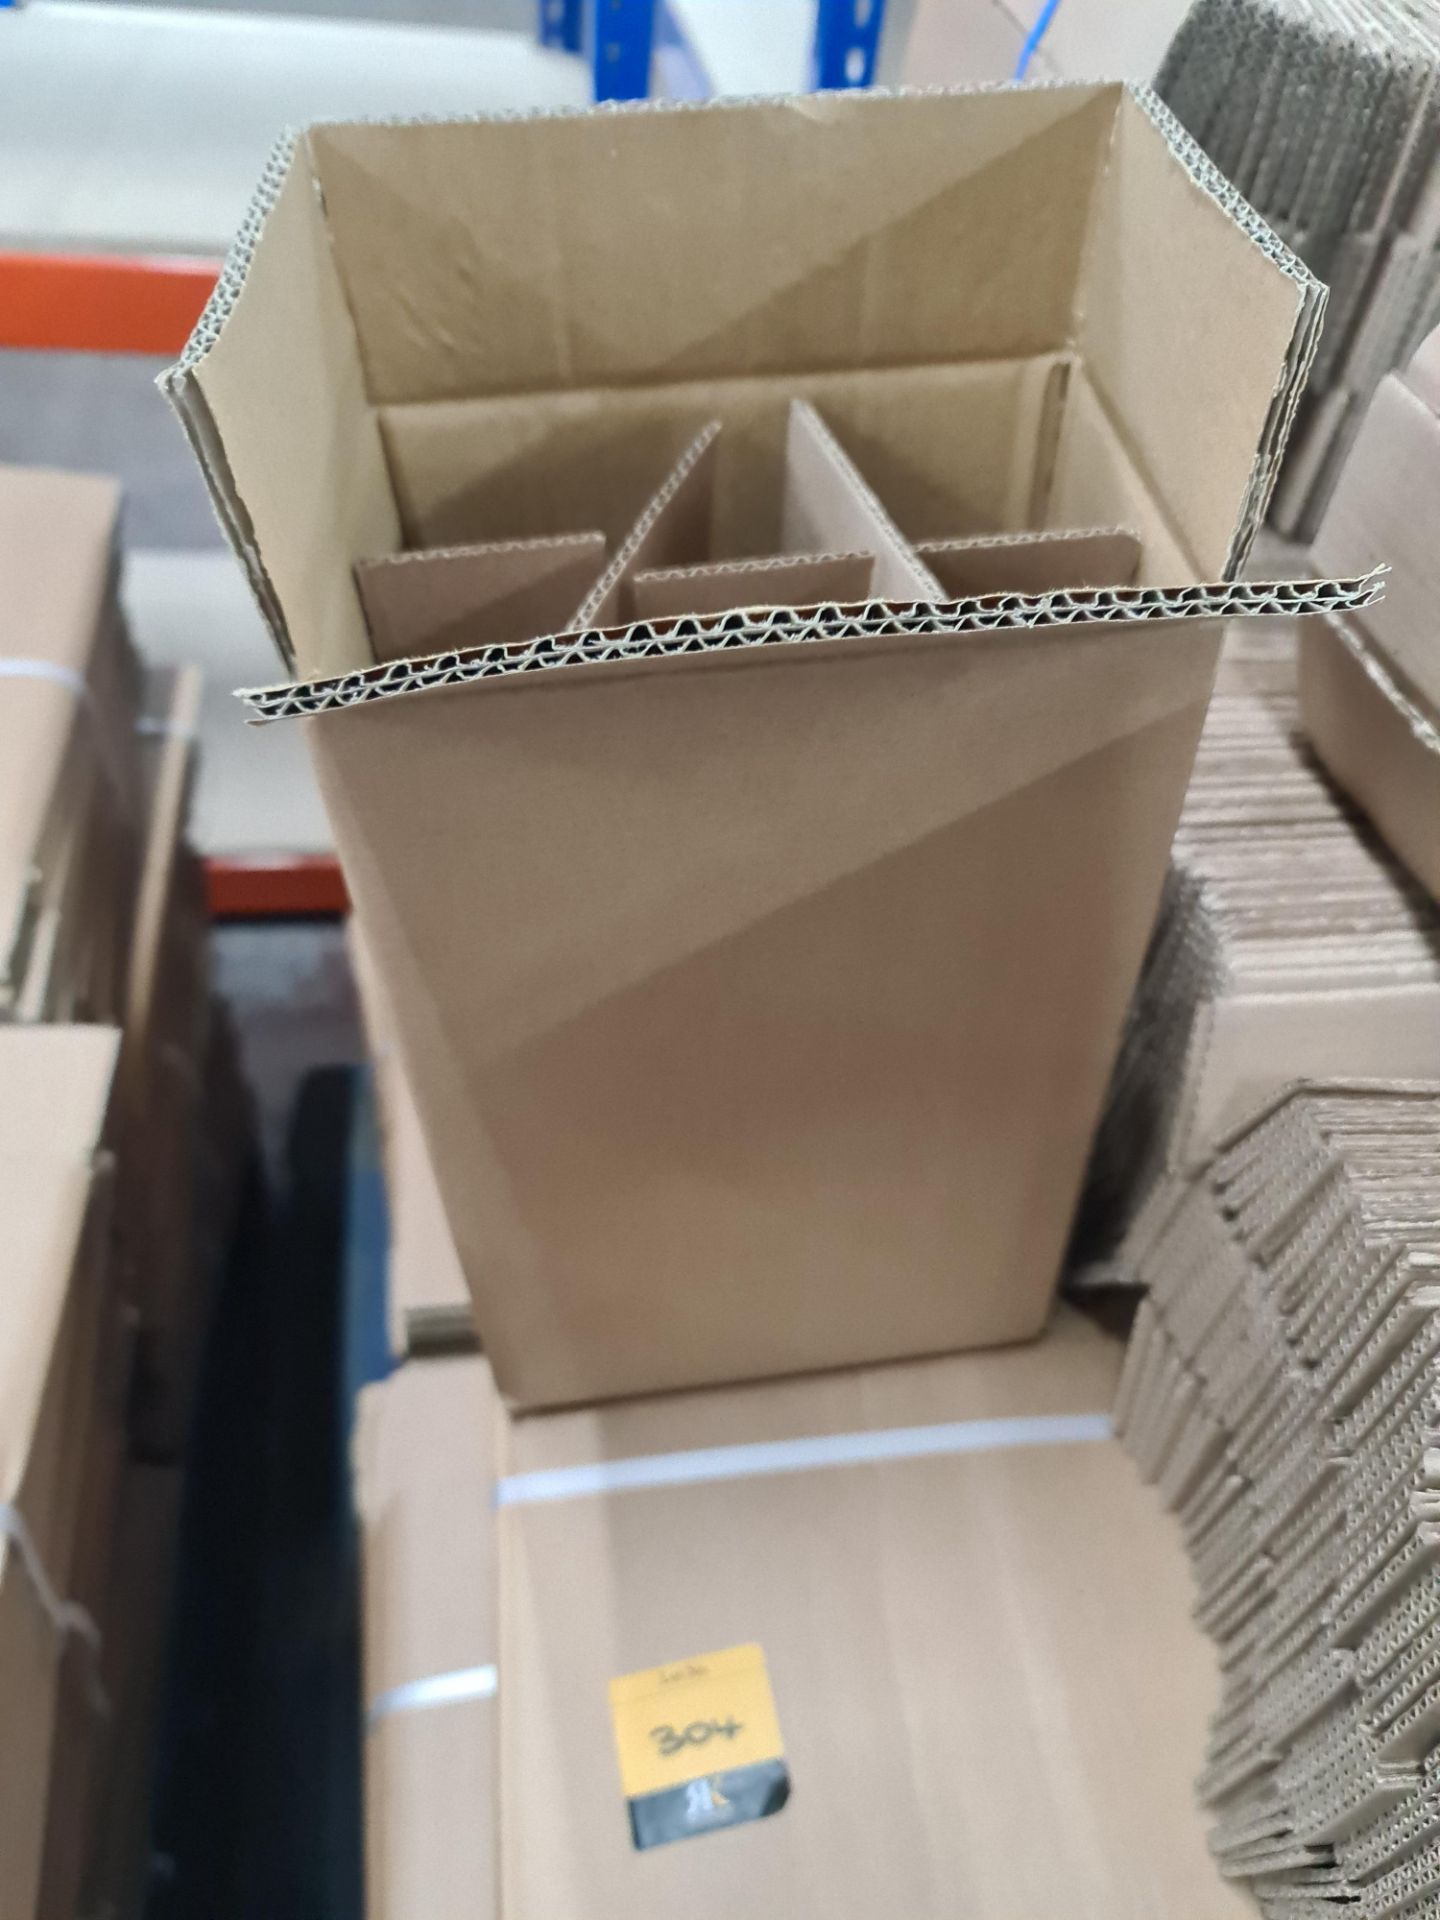 The contents of a pallet of cardboard boxes comprising approximately 300 boxes and 300 inserts; 200